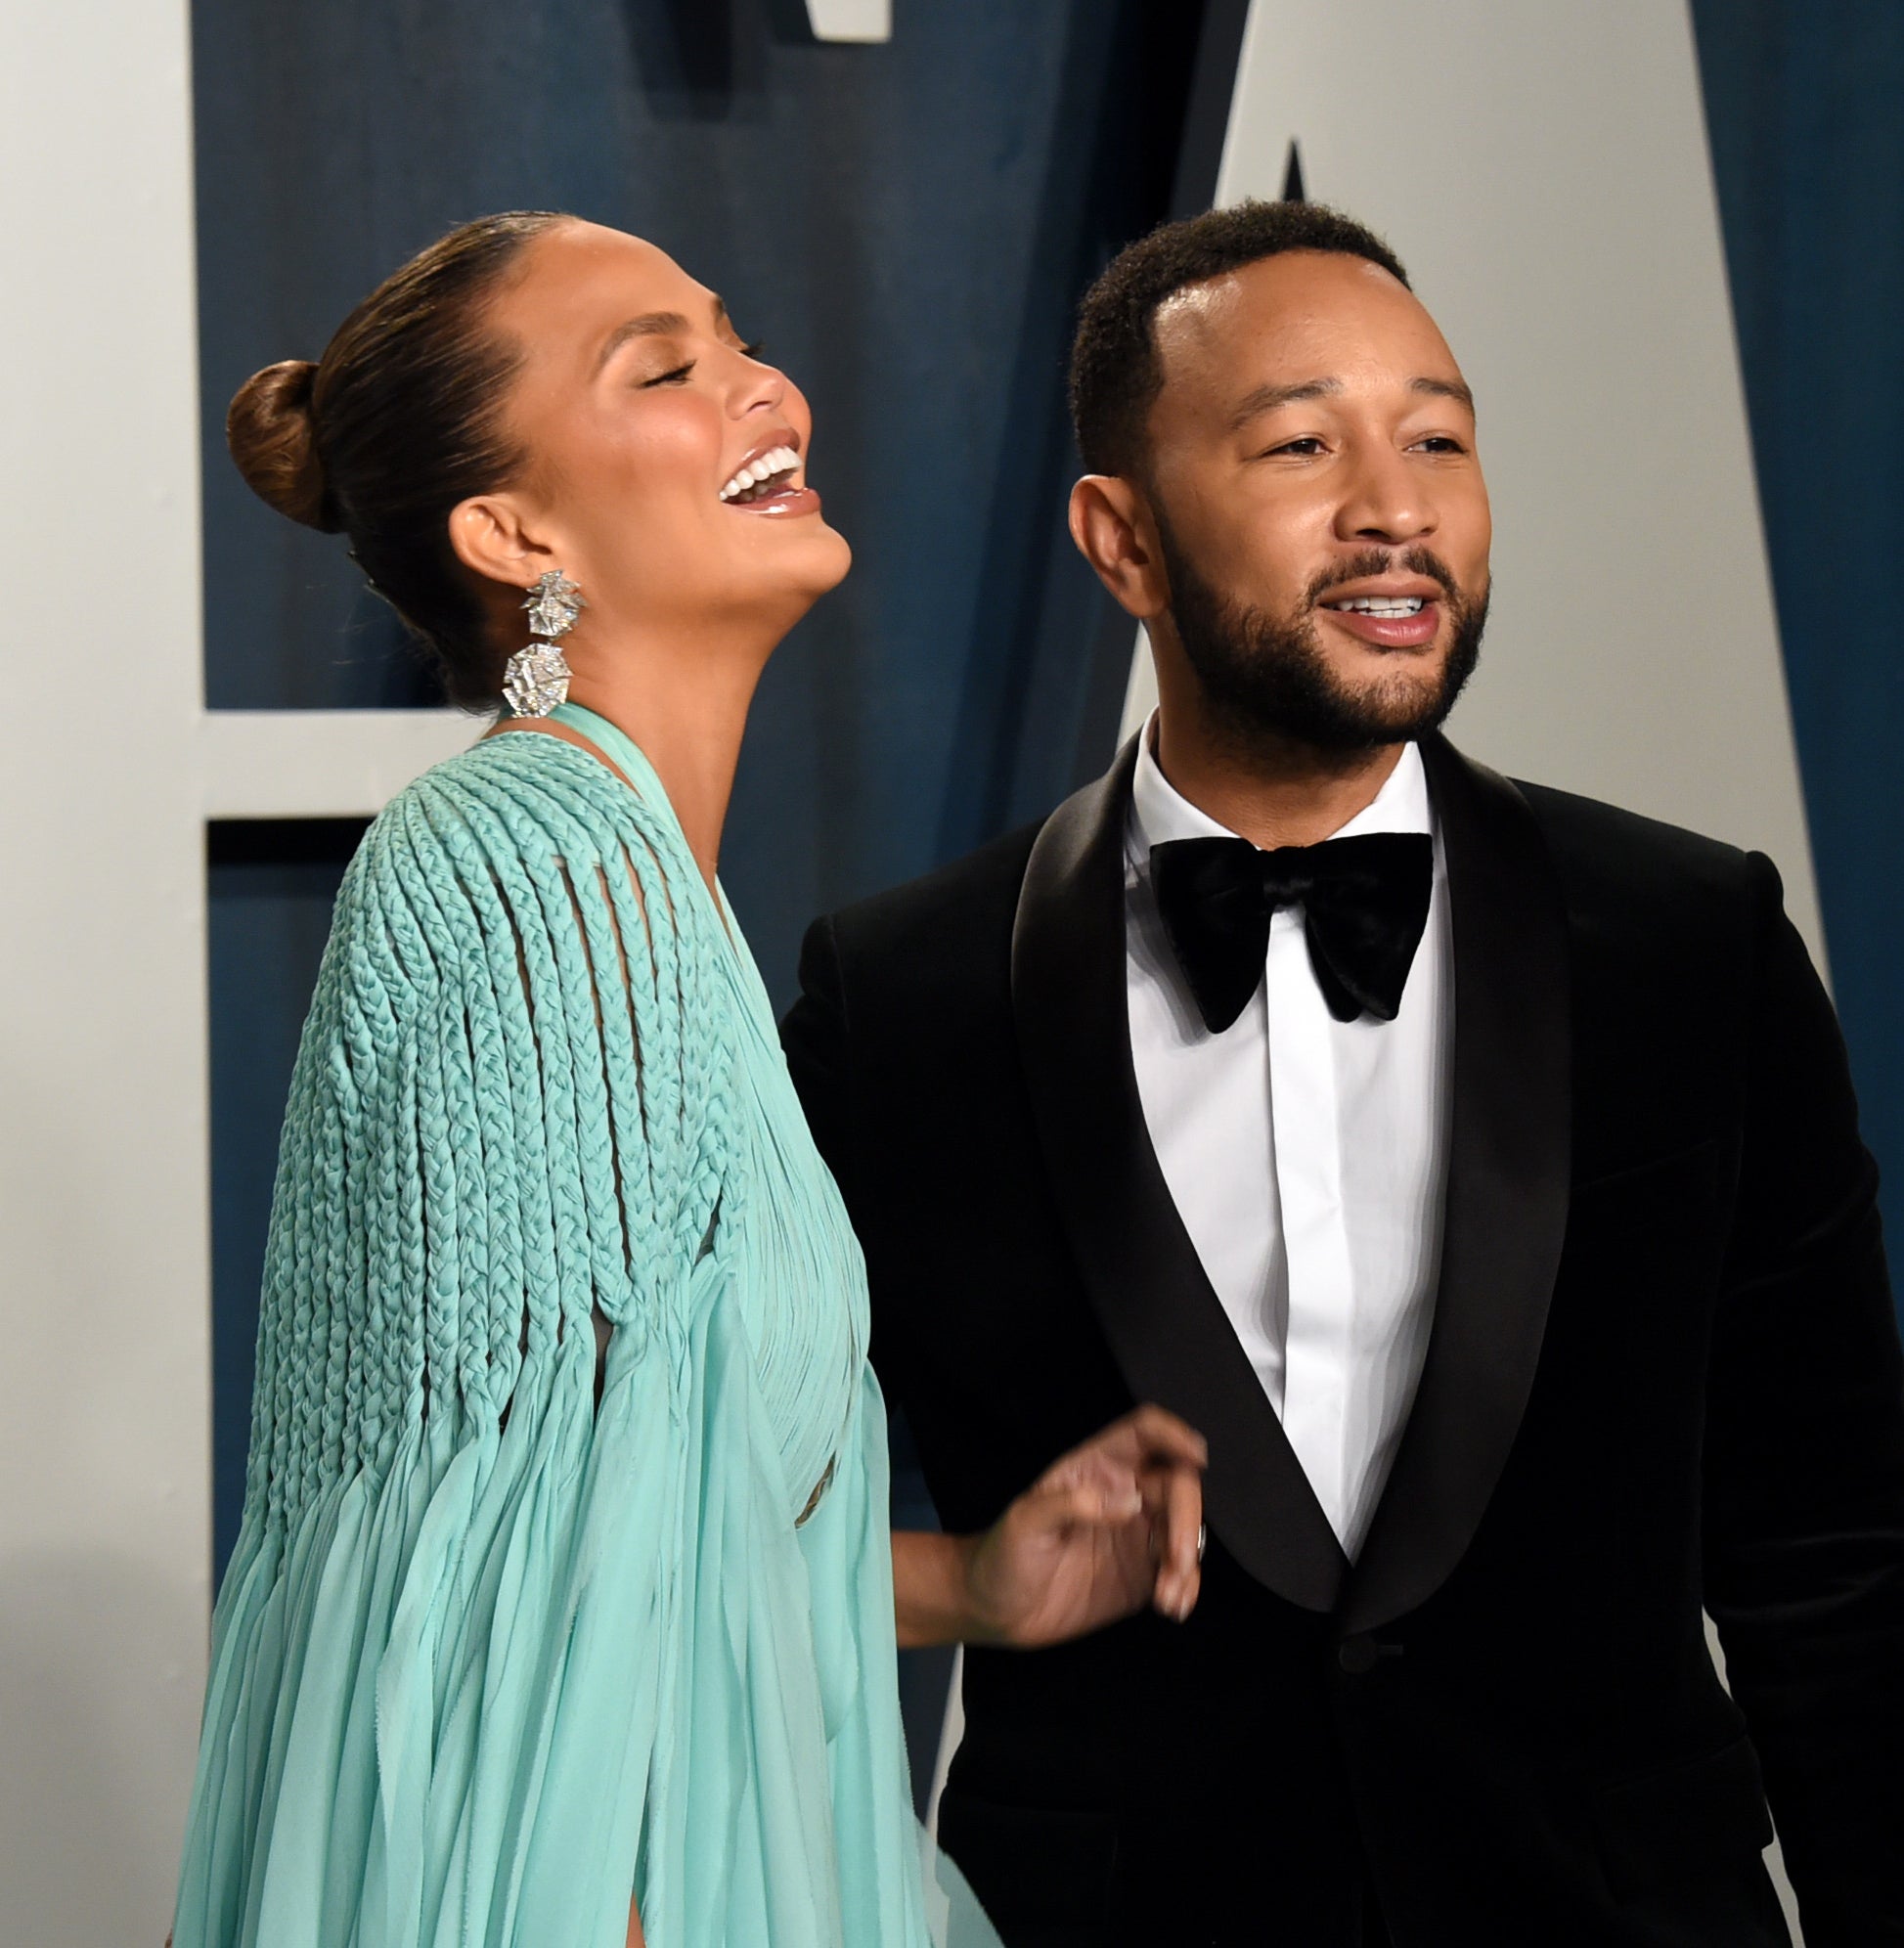 Chrissy Teigen in a pleated dress laughs with John Legend in a classic tuxedo